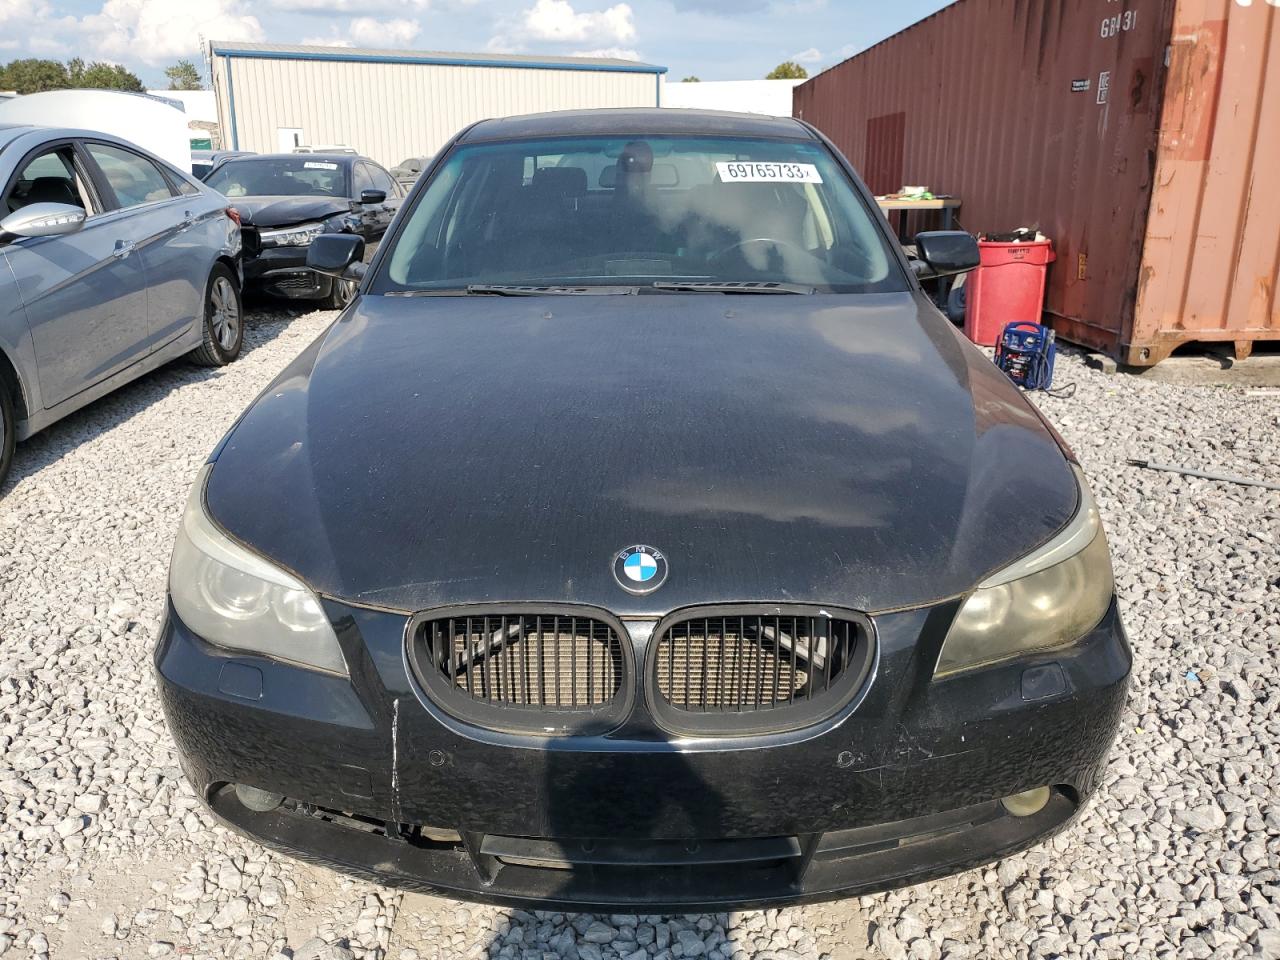 WBANB33574B****** Used and Repairable 2004 BMW 5 Series in Alabama State